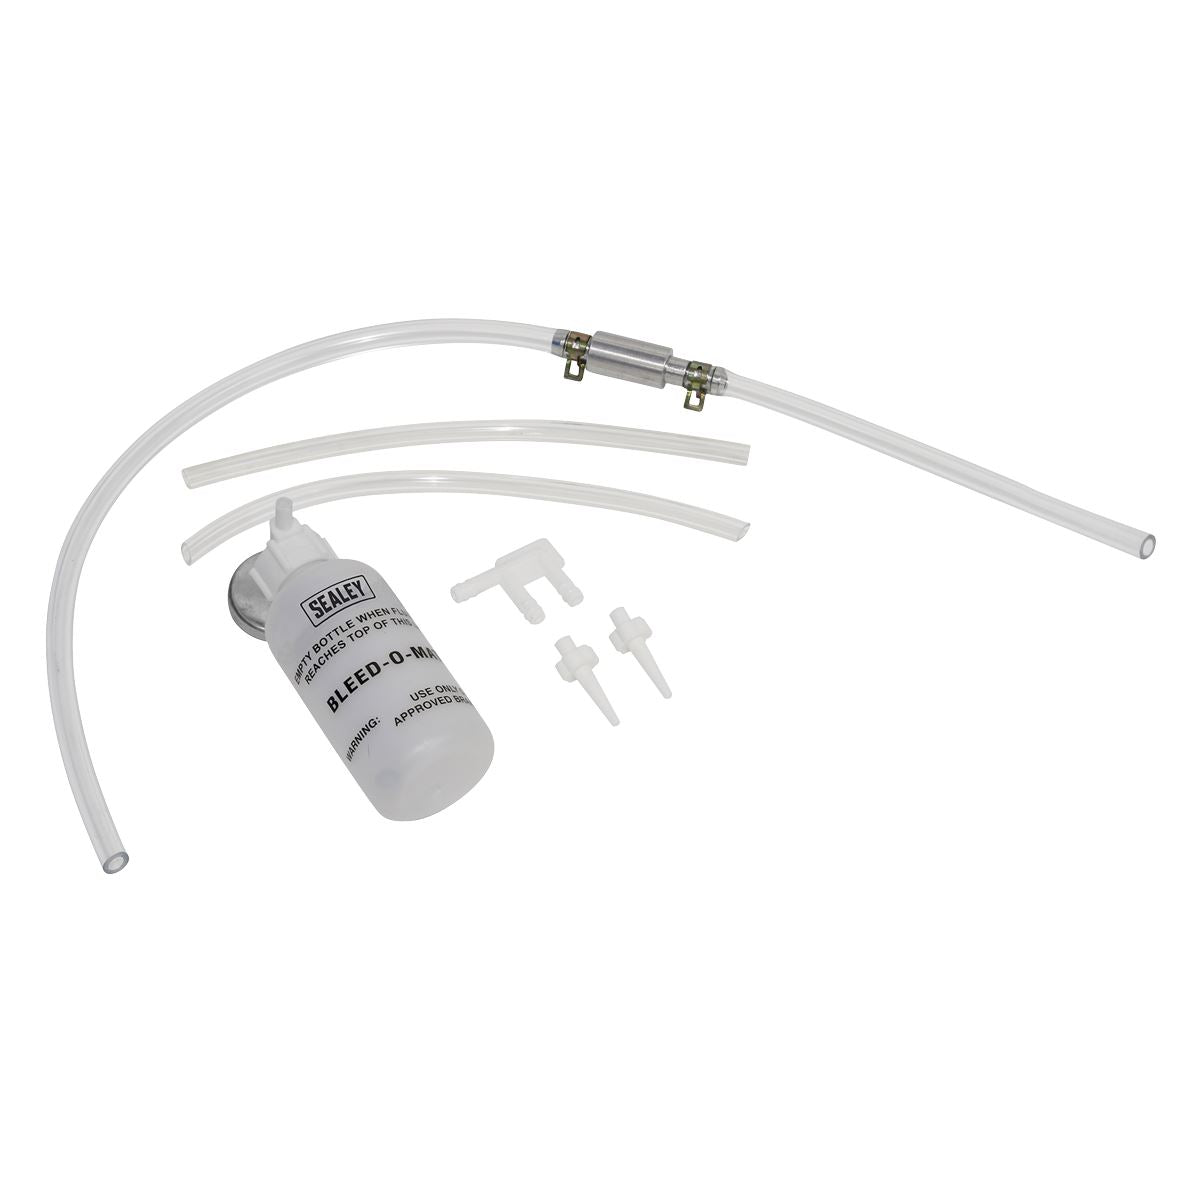 Sealey Brake Bleeder Set with Container